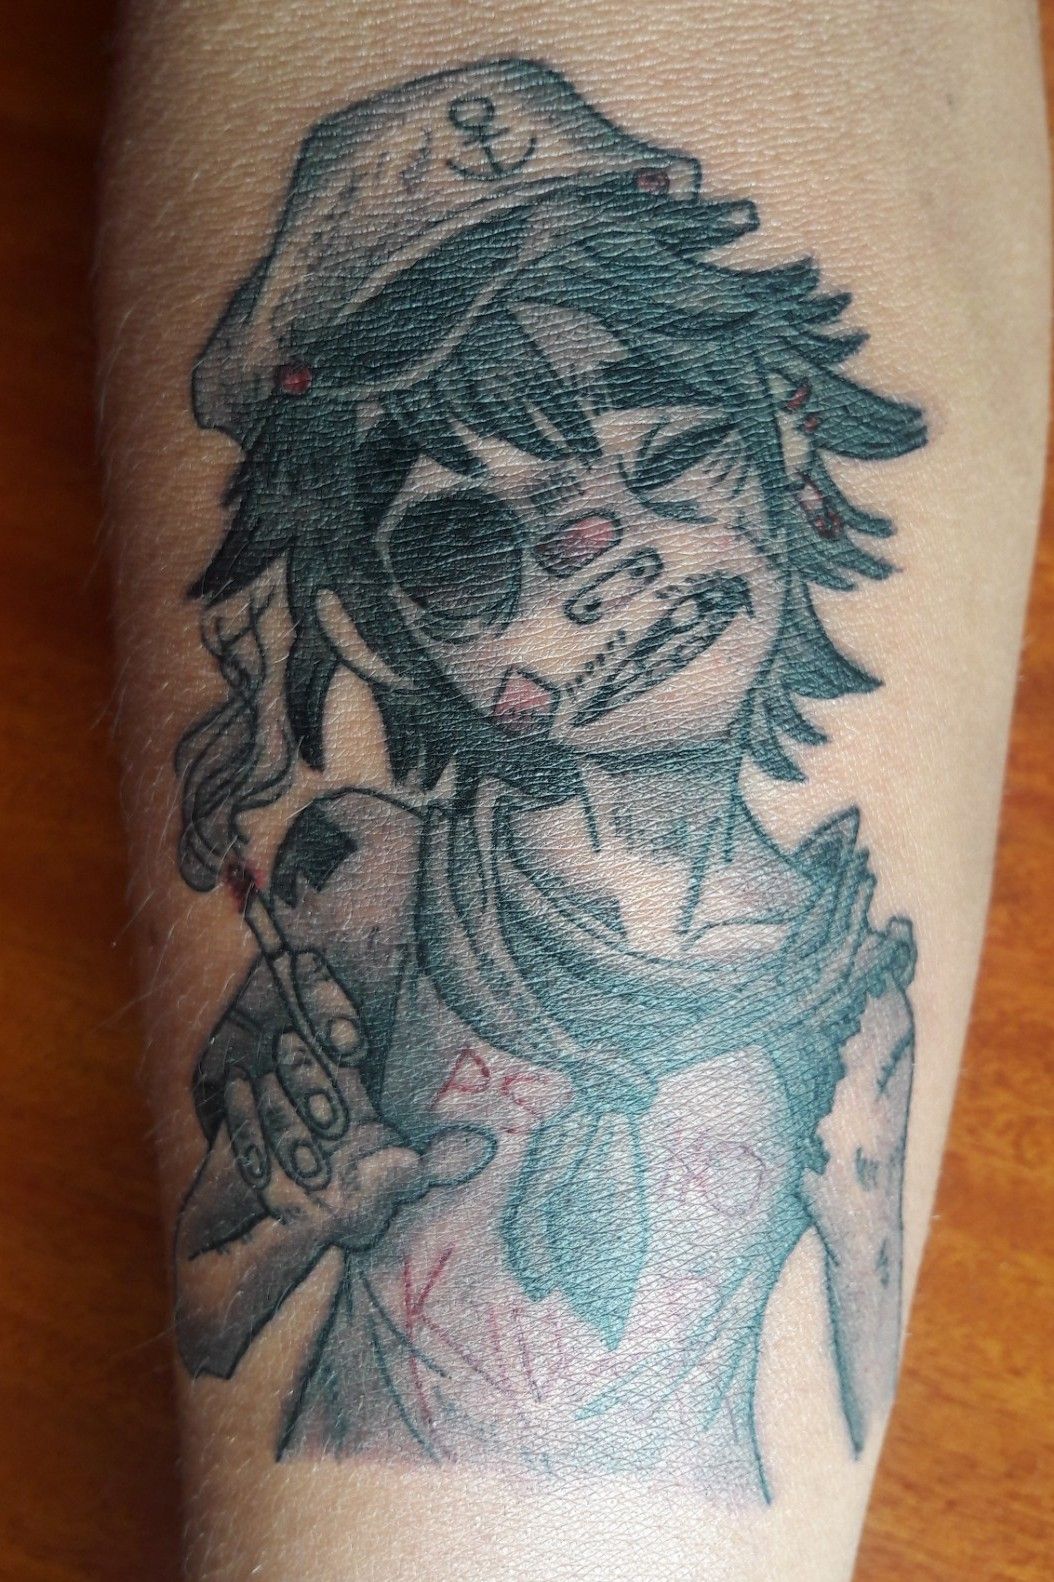 tattoo murdoc and 2d phase 5 by RussianMurdoc on DeviantArt